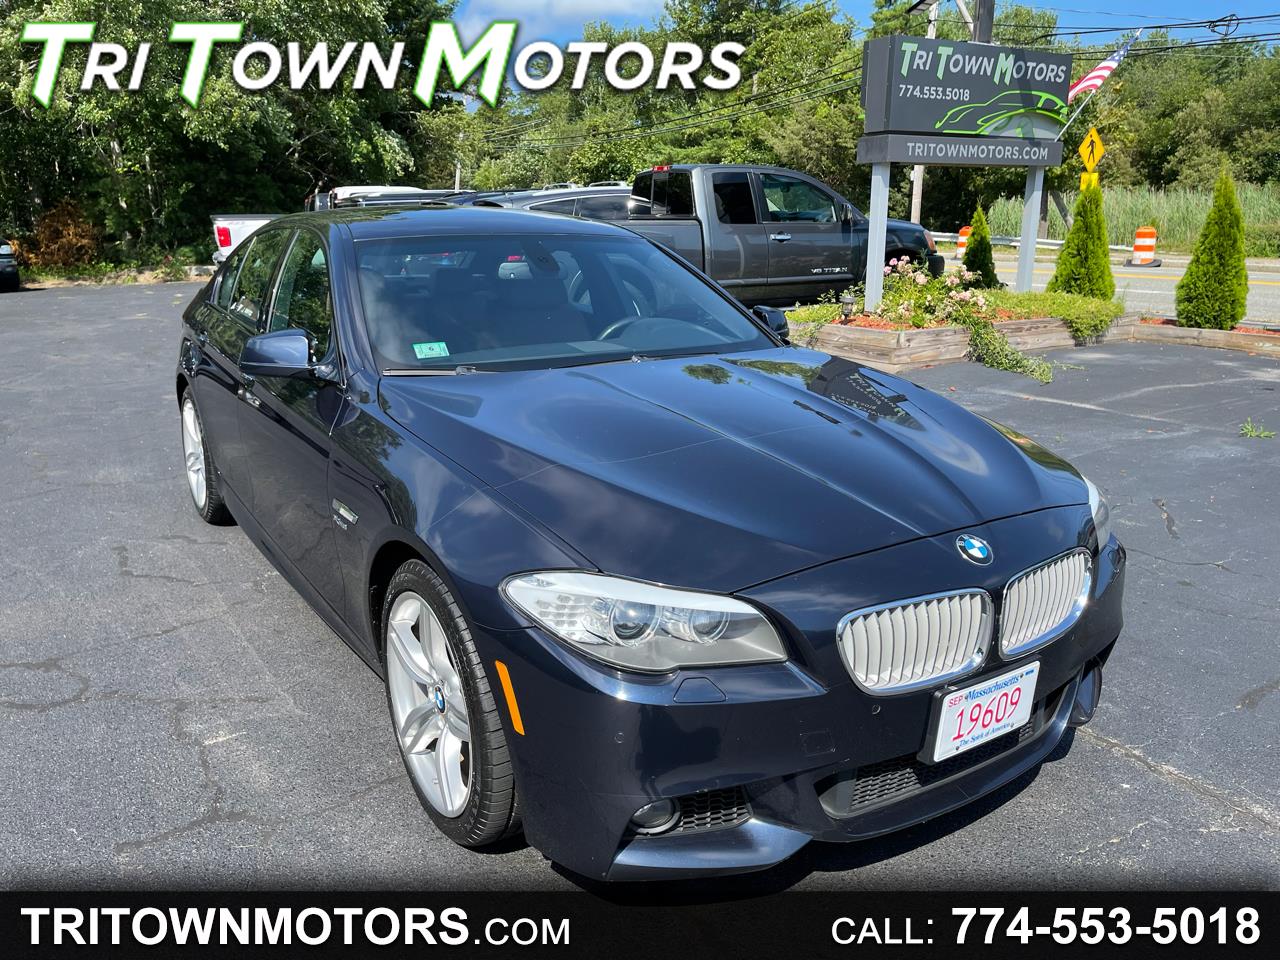 Used Bmw 5 Series Marion Ma